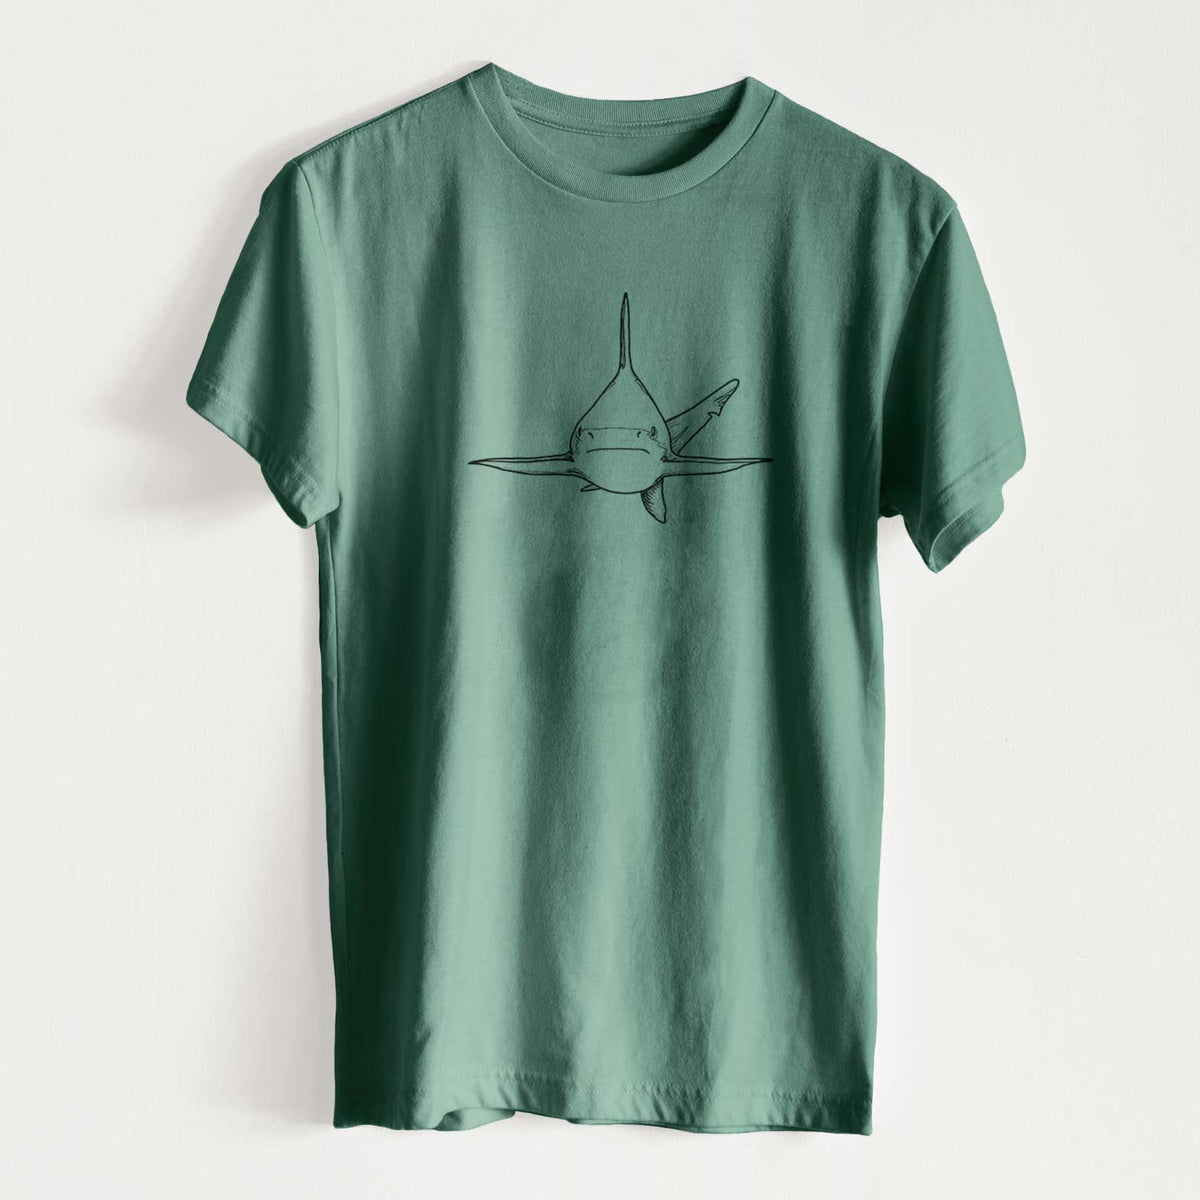 Silvertip Shark Front - Unisex Recycled Eco Tee  - CLOSEOUT - FINAL SALE